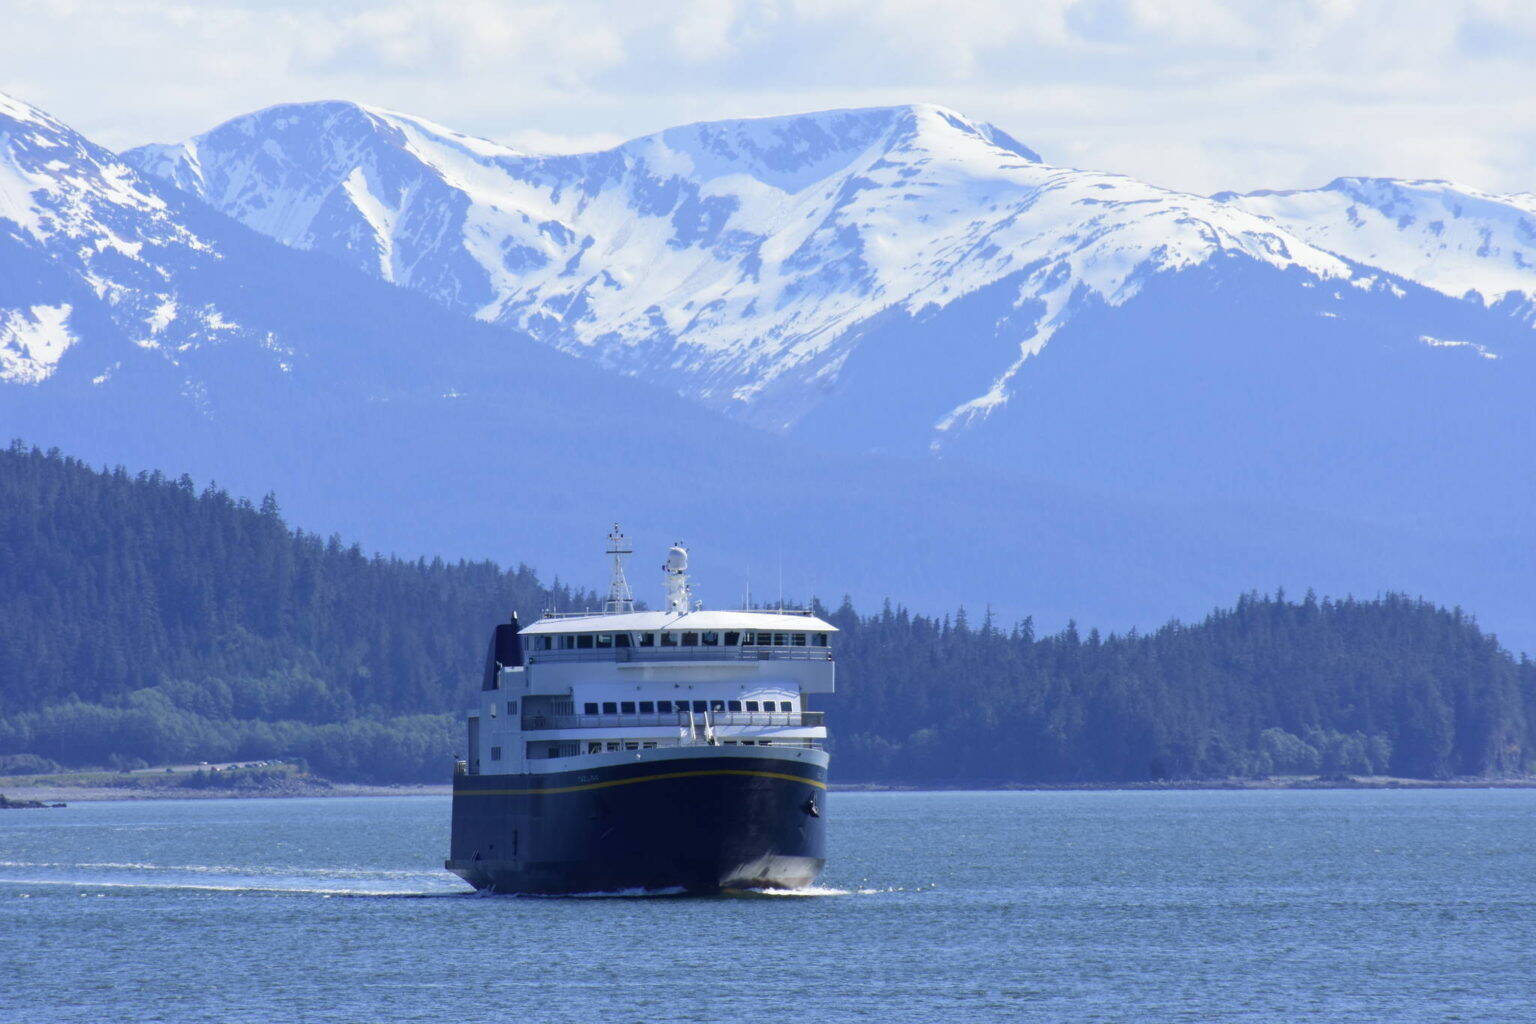 Peter Segall / Juneau Empire file
The MV Tazlina arrives in Juneau in this May 2020 photo. Federal relief dollars may be coming to the state to aid the Alaska Marine Highway System, but the unions that run the ships say workers are leaving the state.